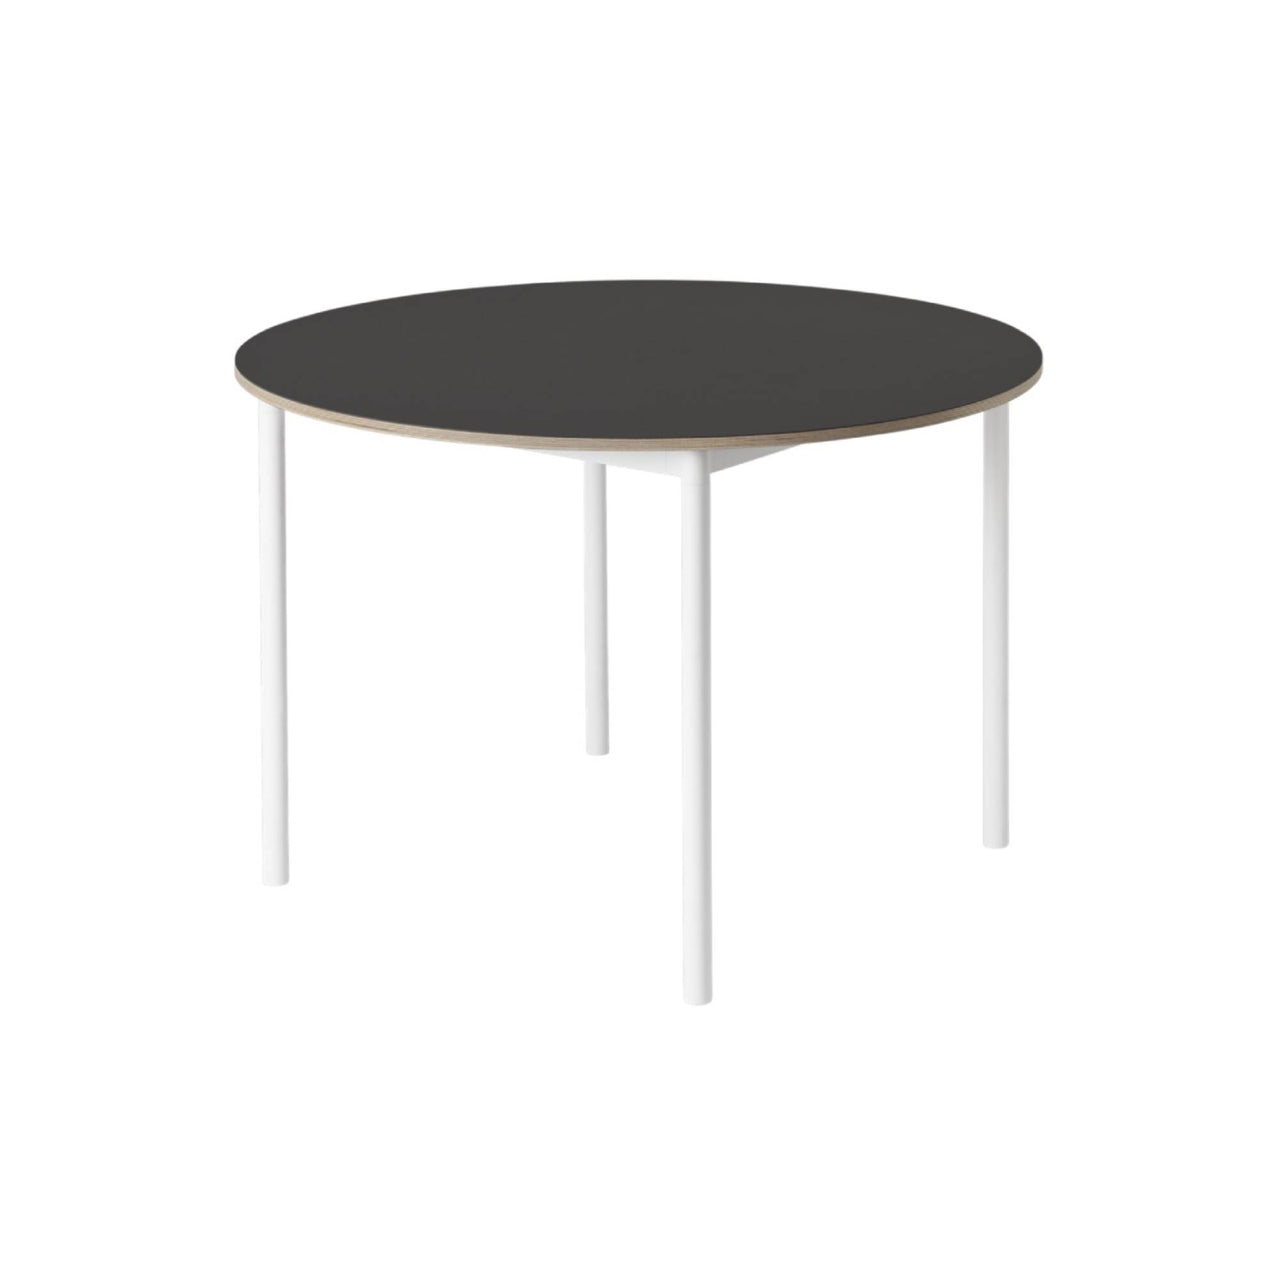 Base Table: Round + Small - 35.4